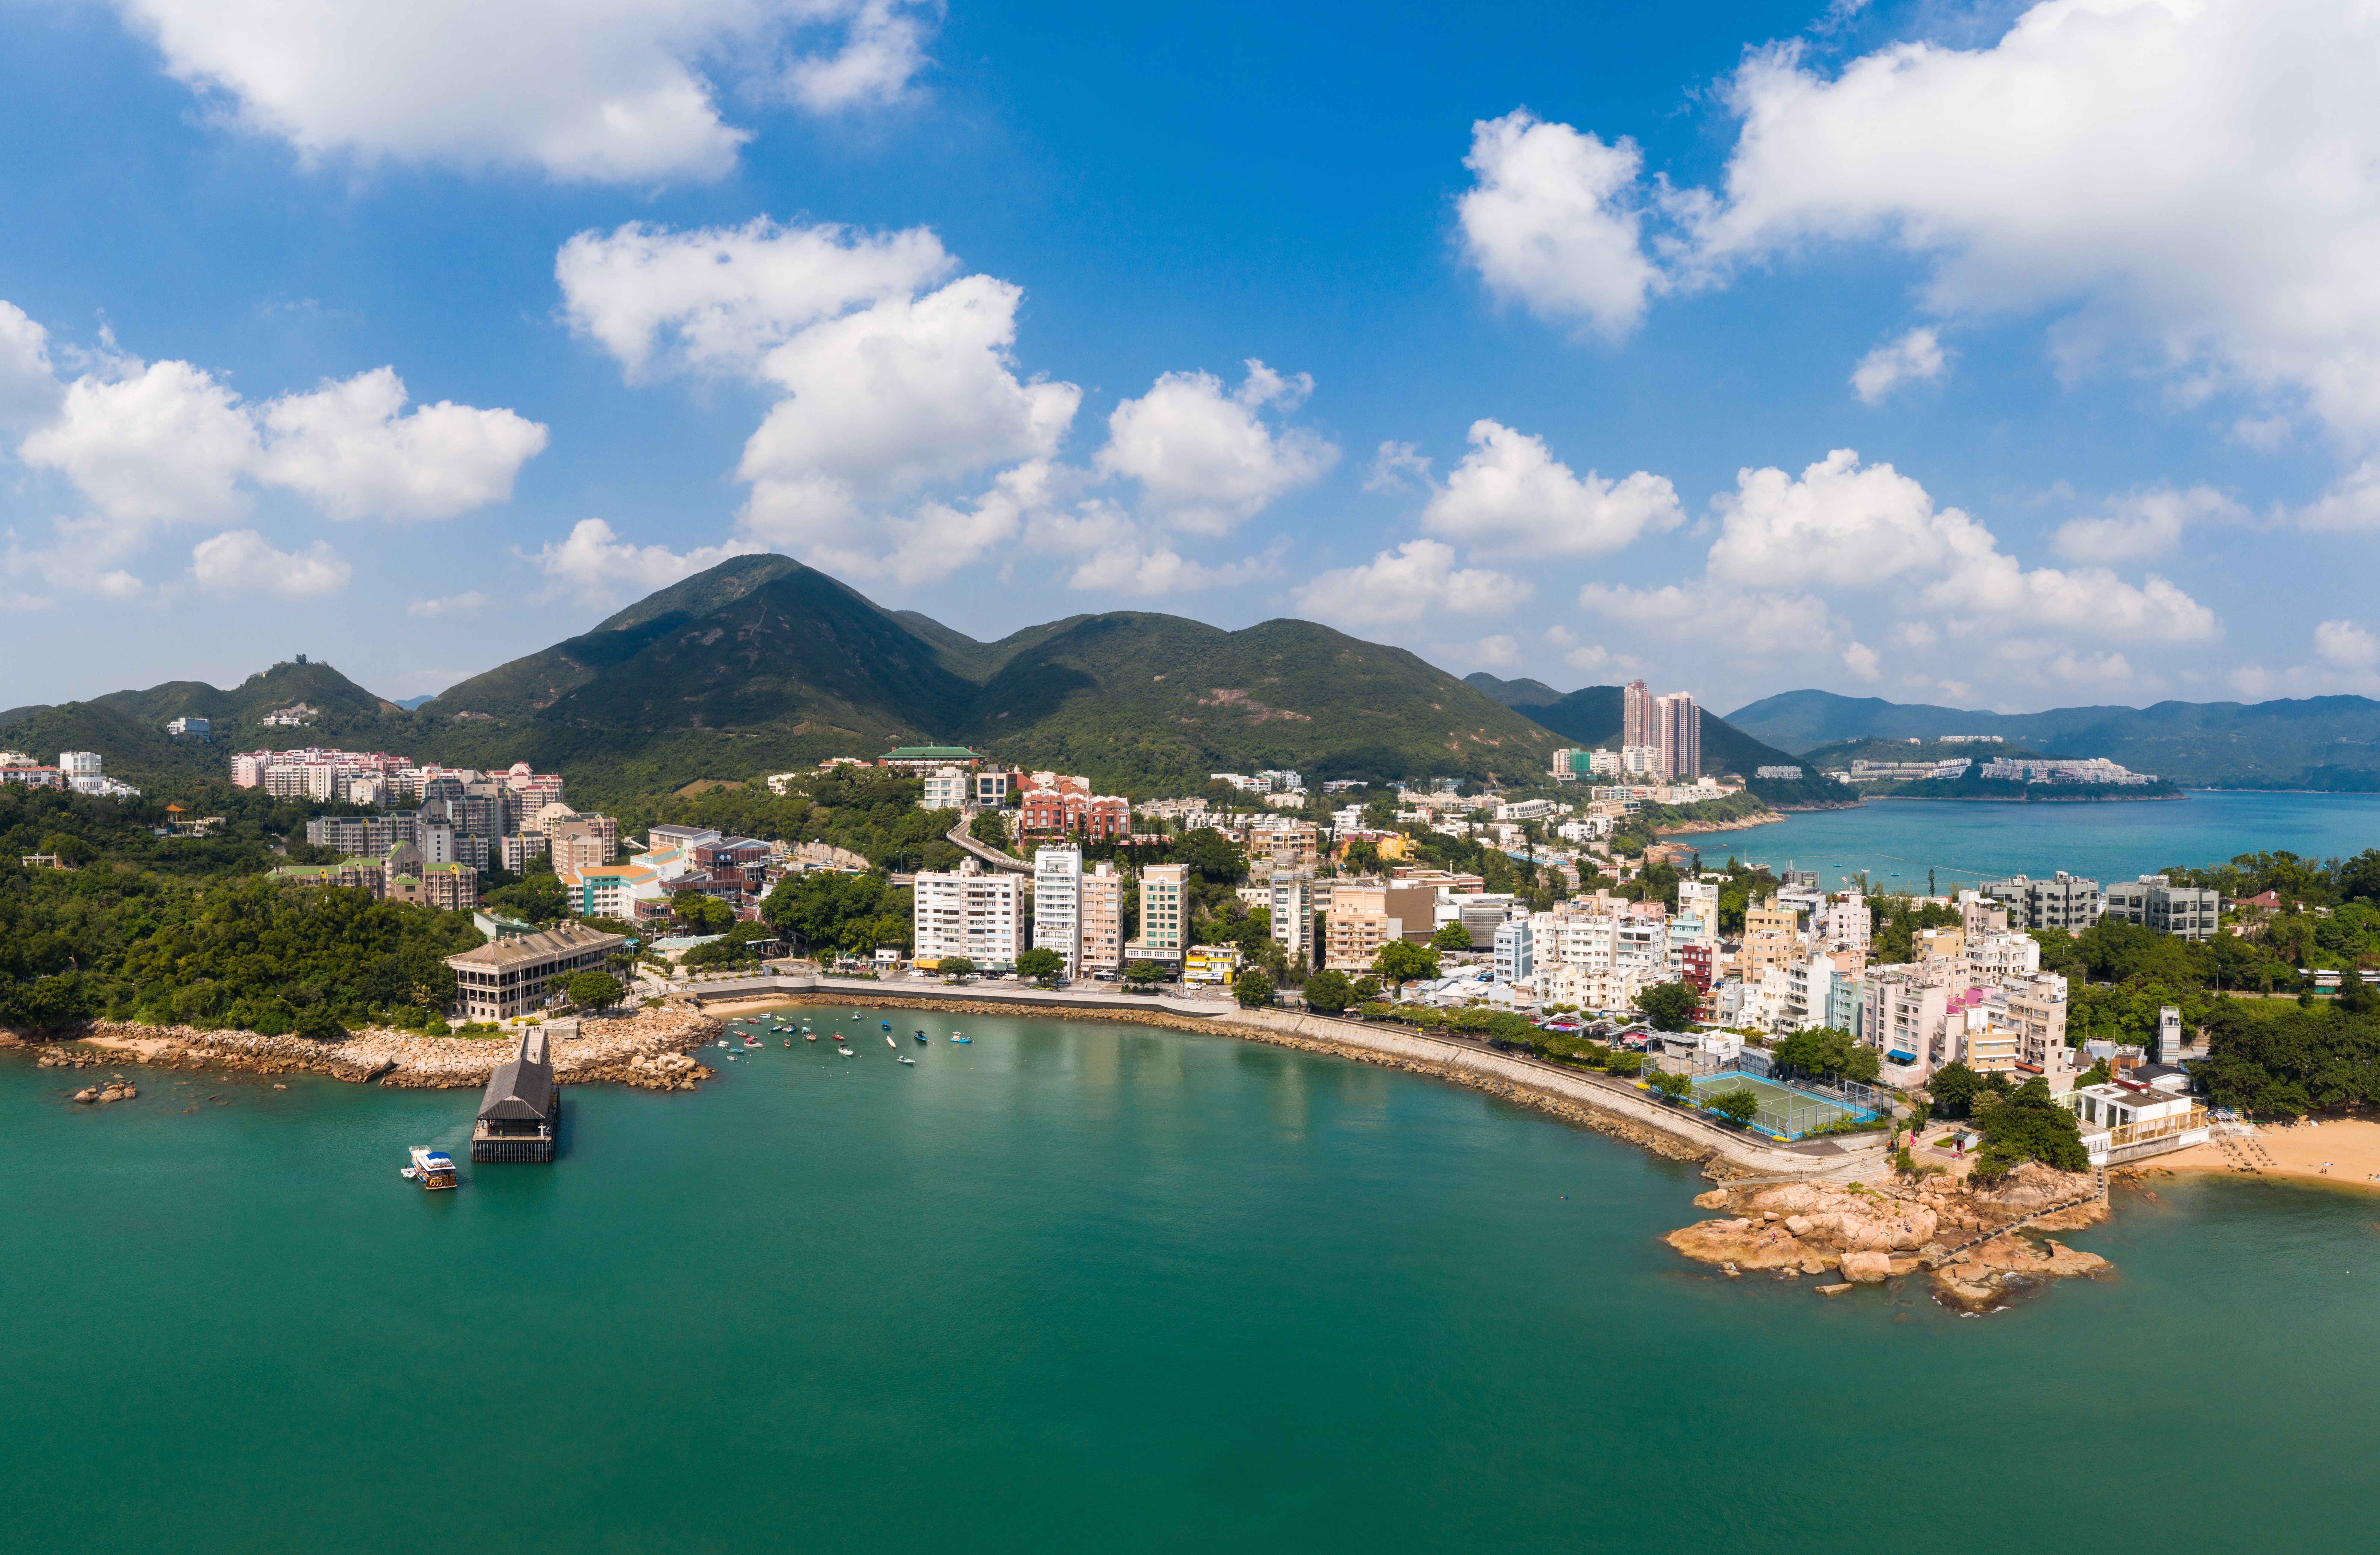 Stanley is a popular destination in the south of Hong Kong Island. Photo: Getty Images/iStockphoto